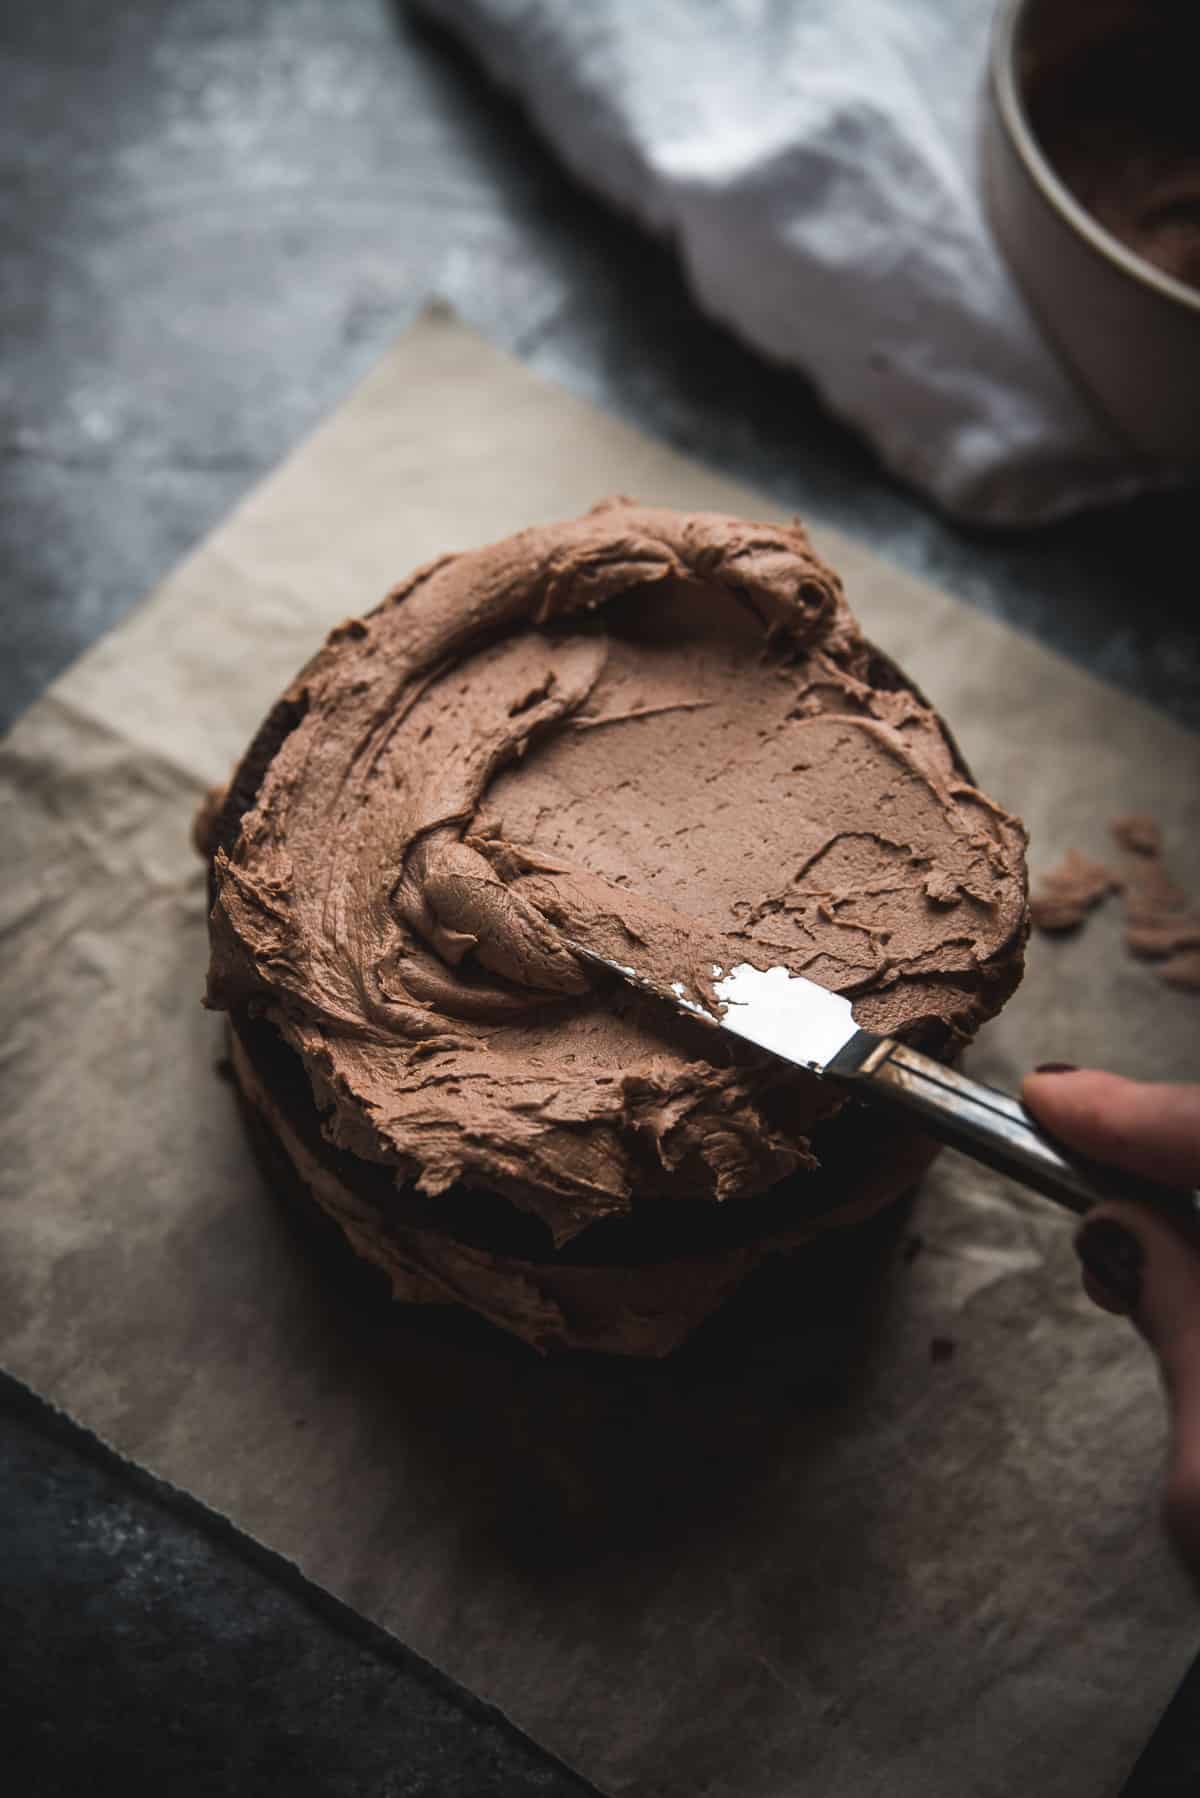 spreading chocolate buttercream on a small layer cake